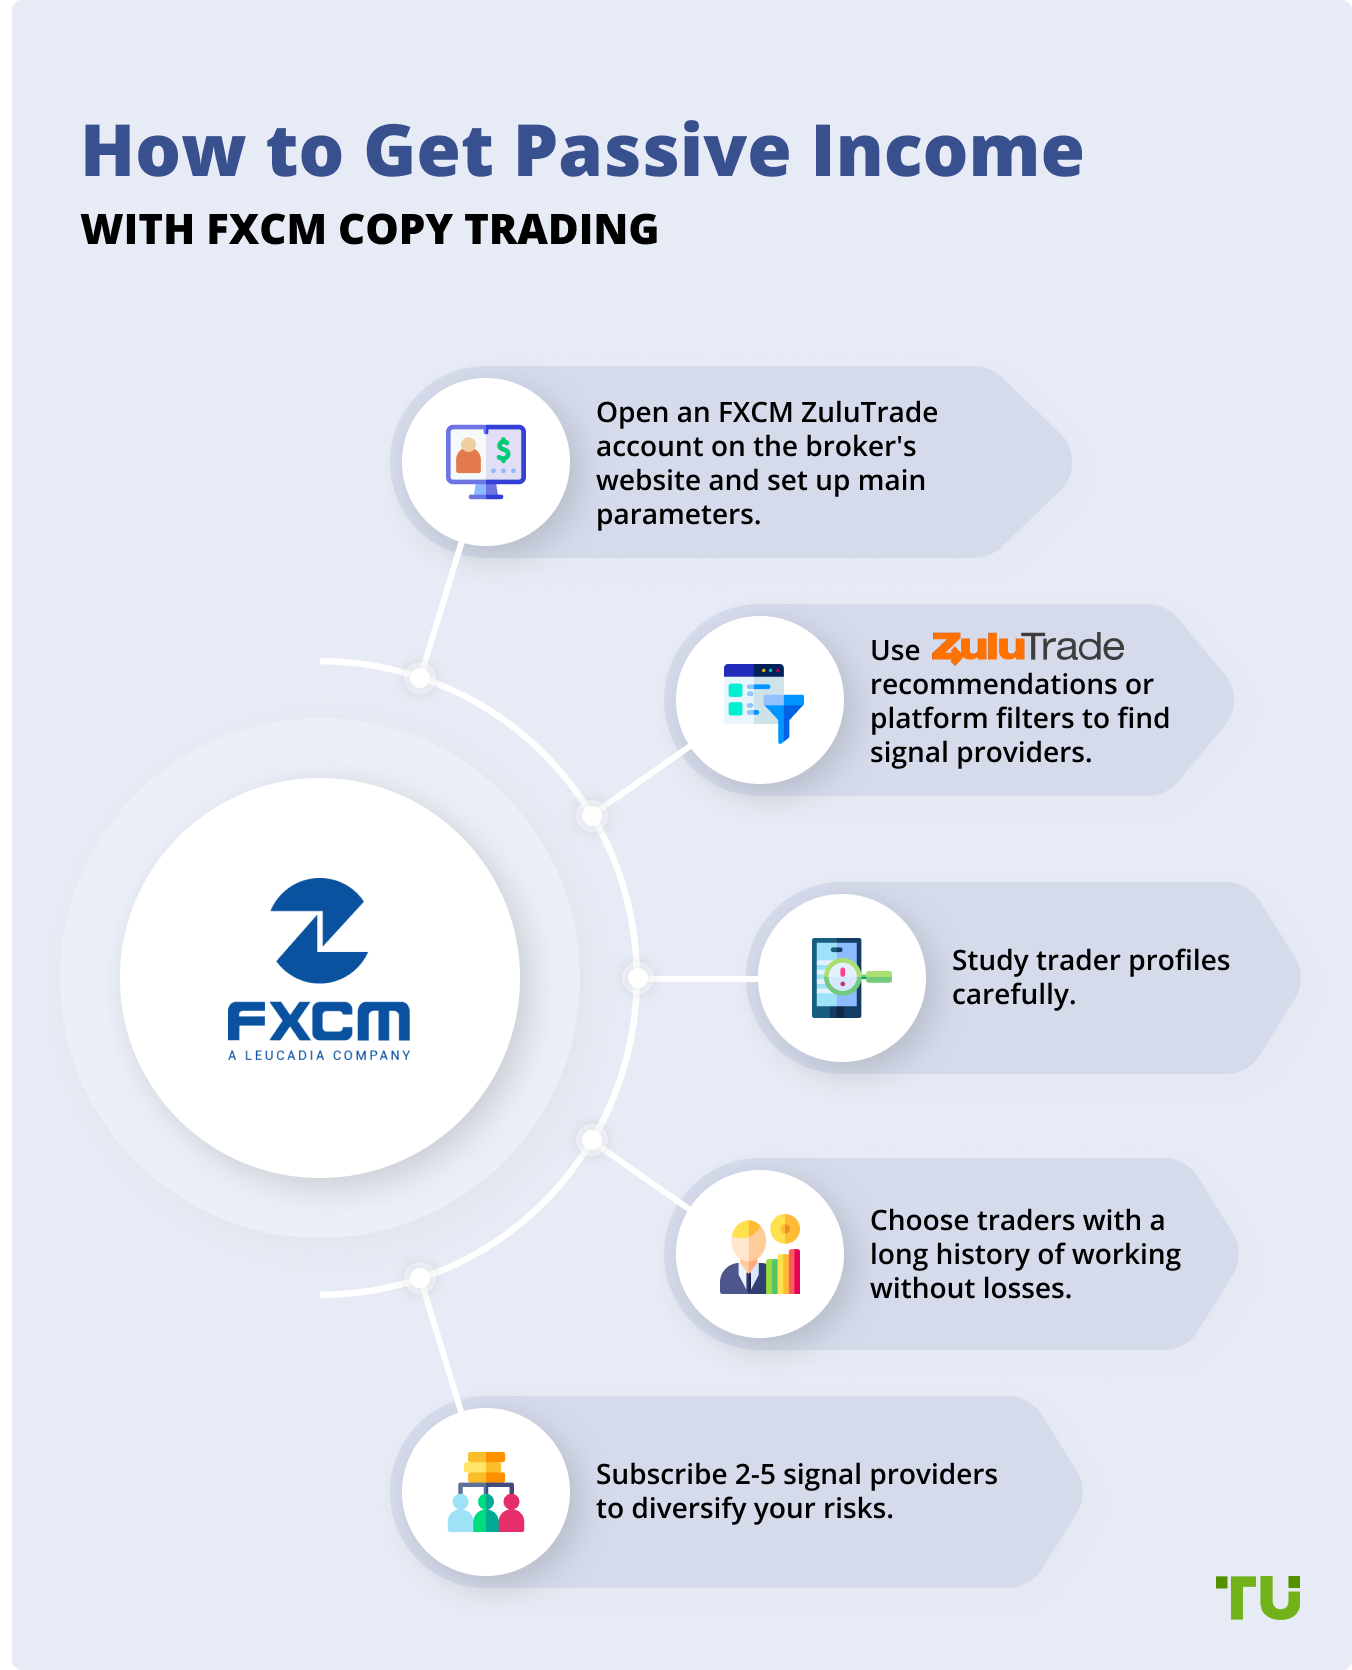 How to Get Passive Income with FXCM Copy Trading